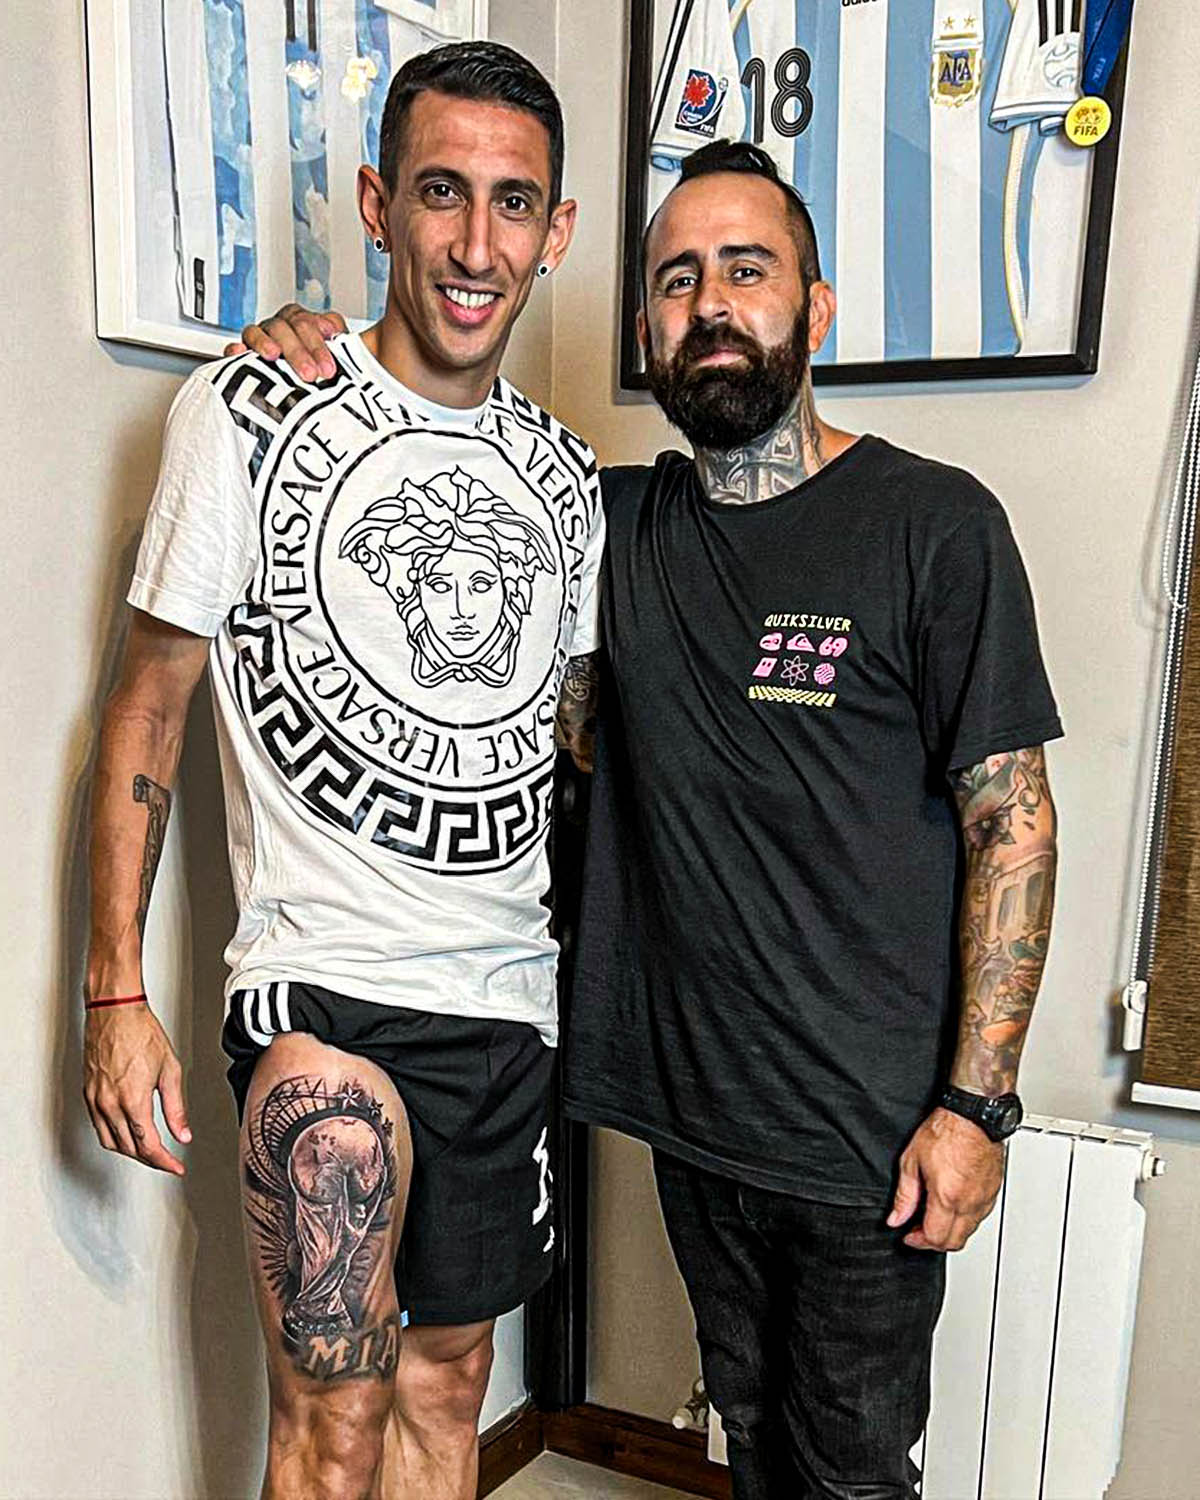 Messi tattoos a hit in Argentina after World Cup win